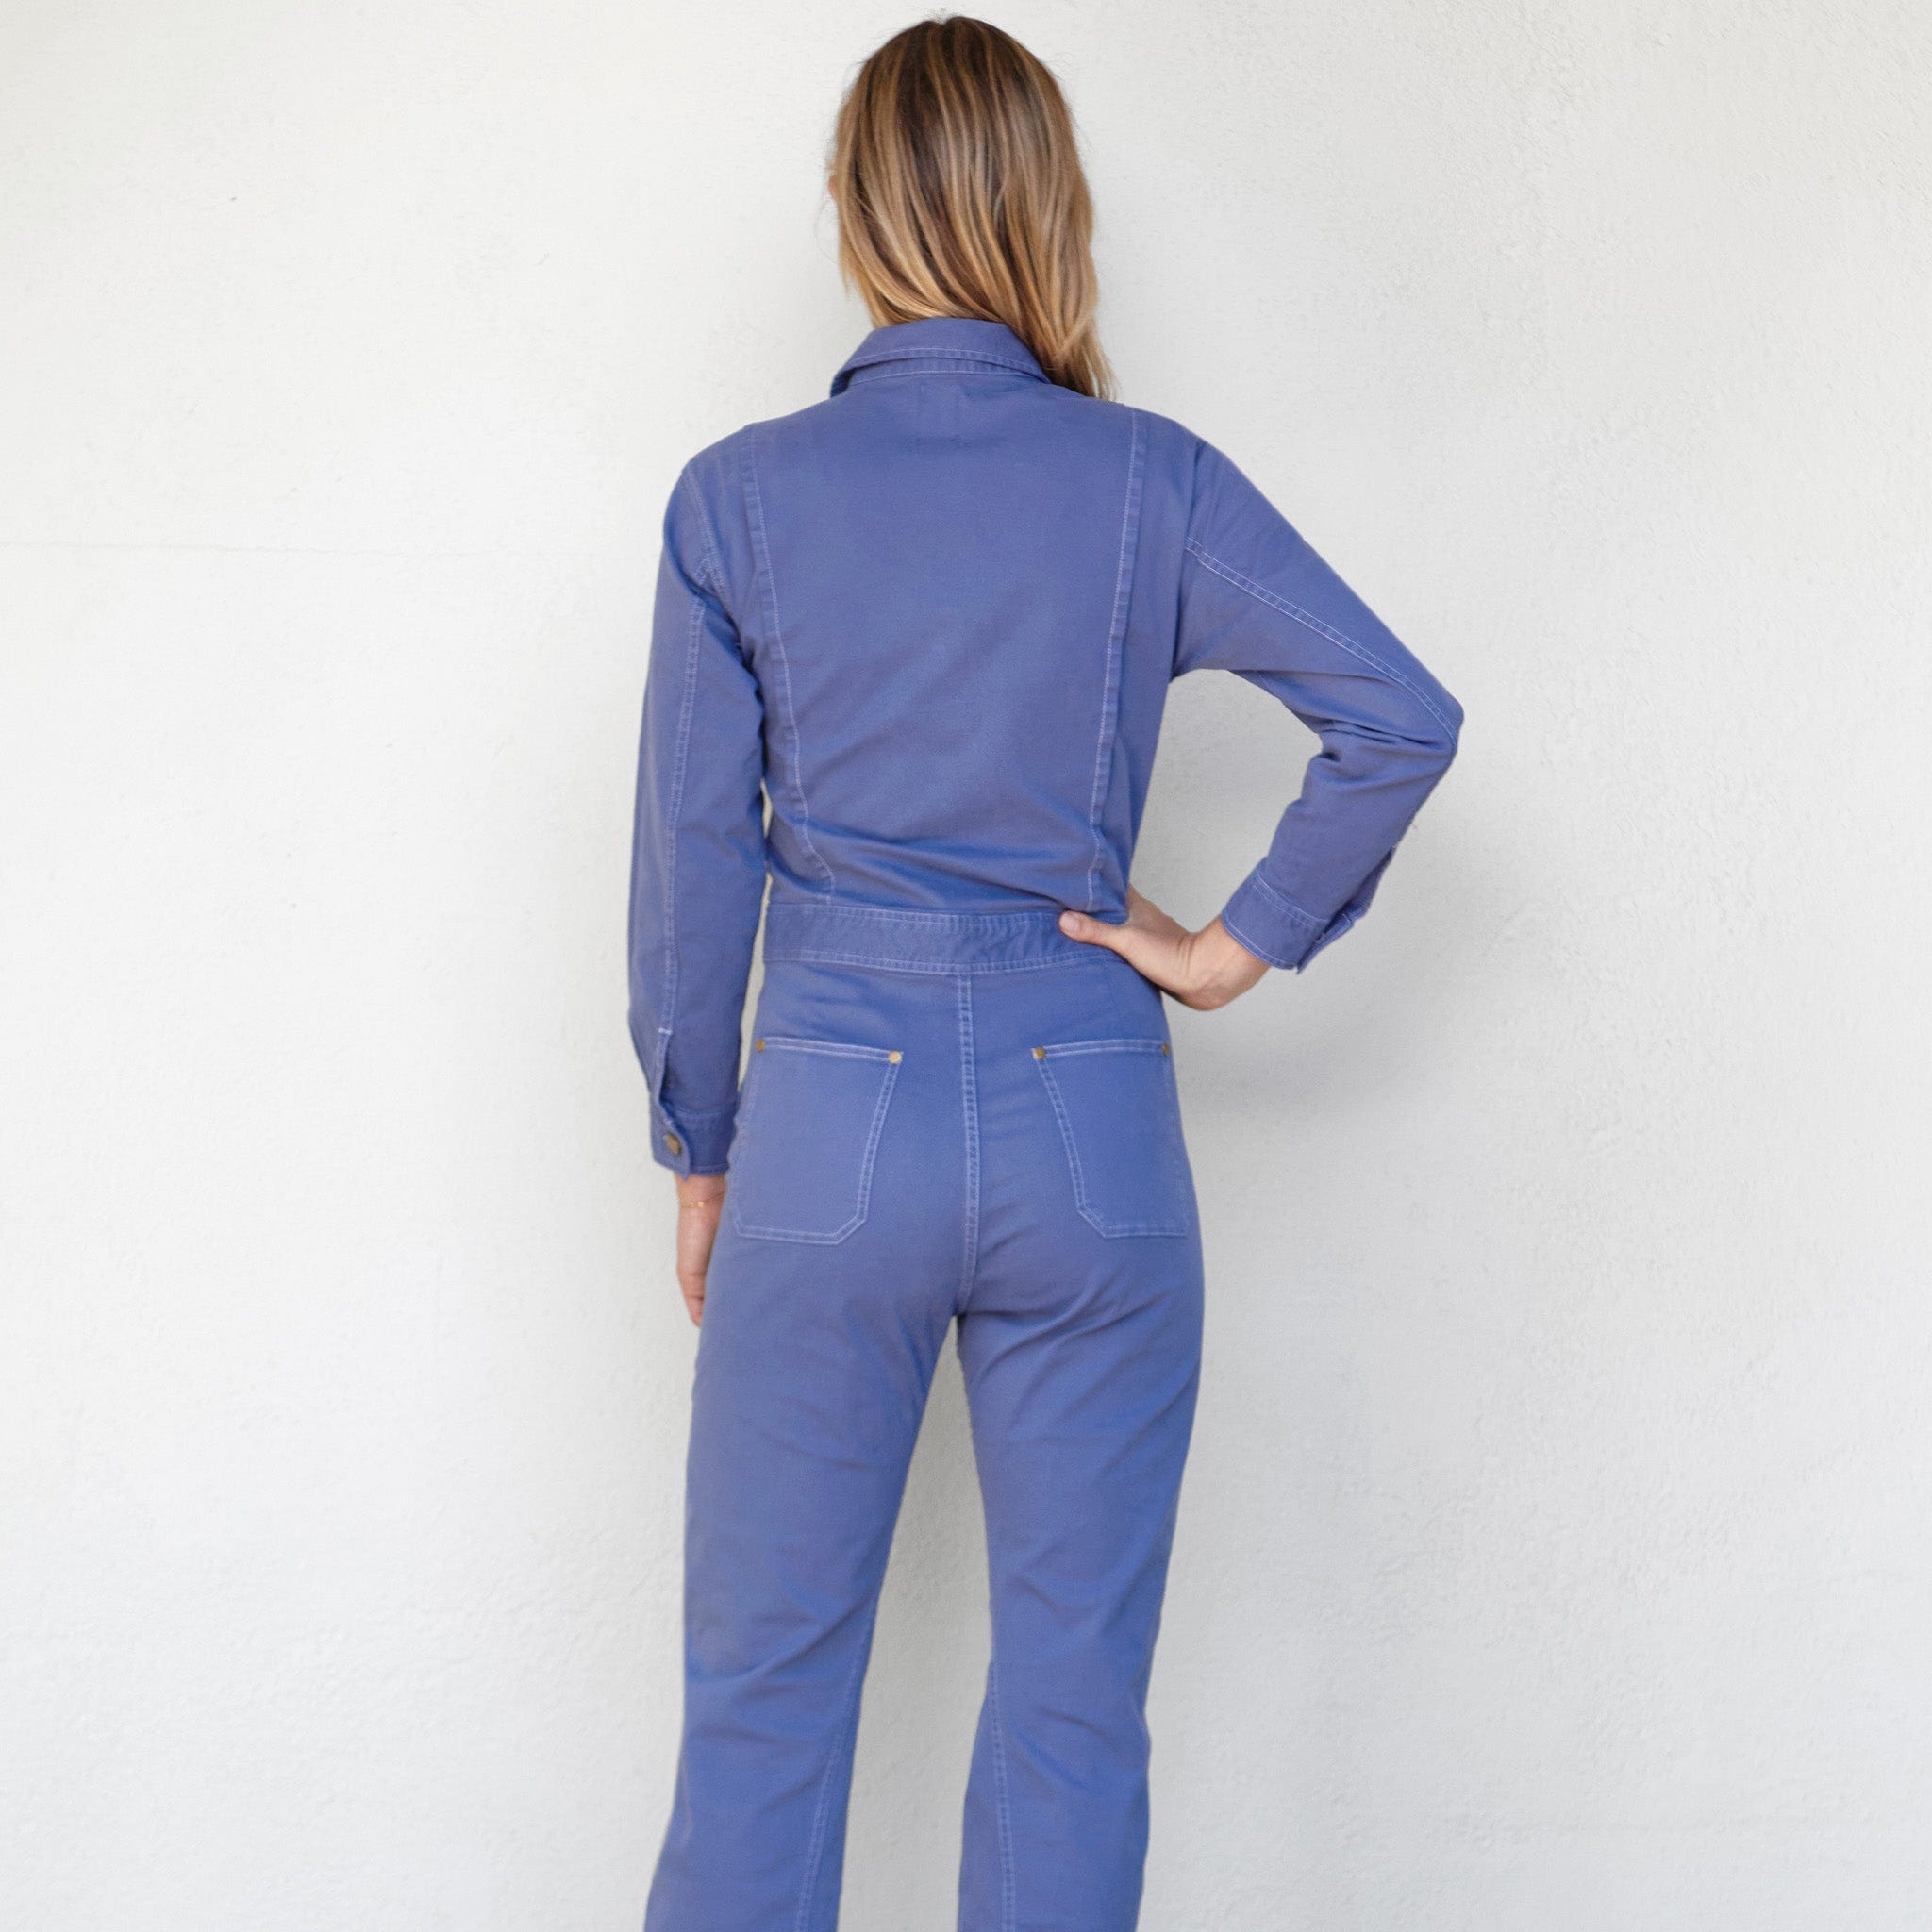 Only Jane Apparel French Blue / 8 The Only Jane Jumpsuit